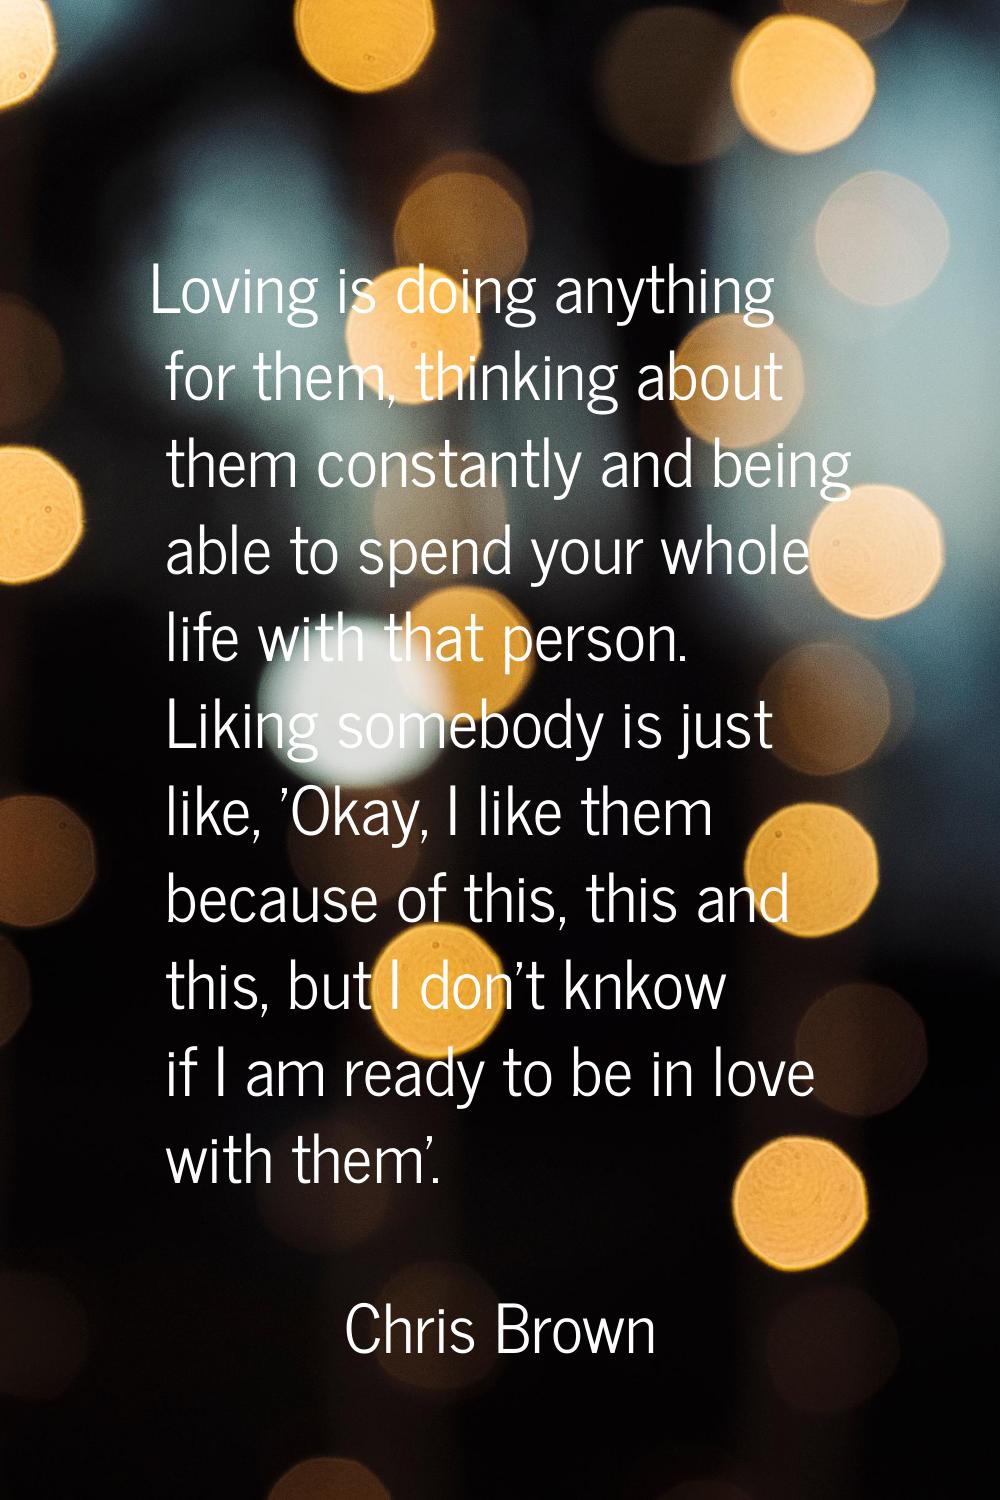 Loving is doing anything for them, thinking about them constantly and being able to spend your whol